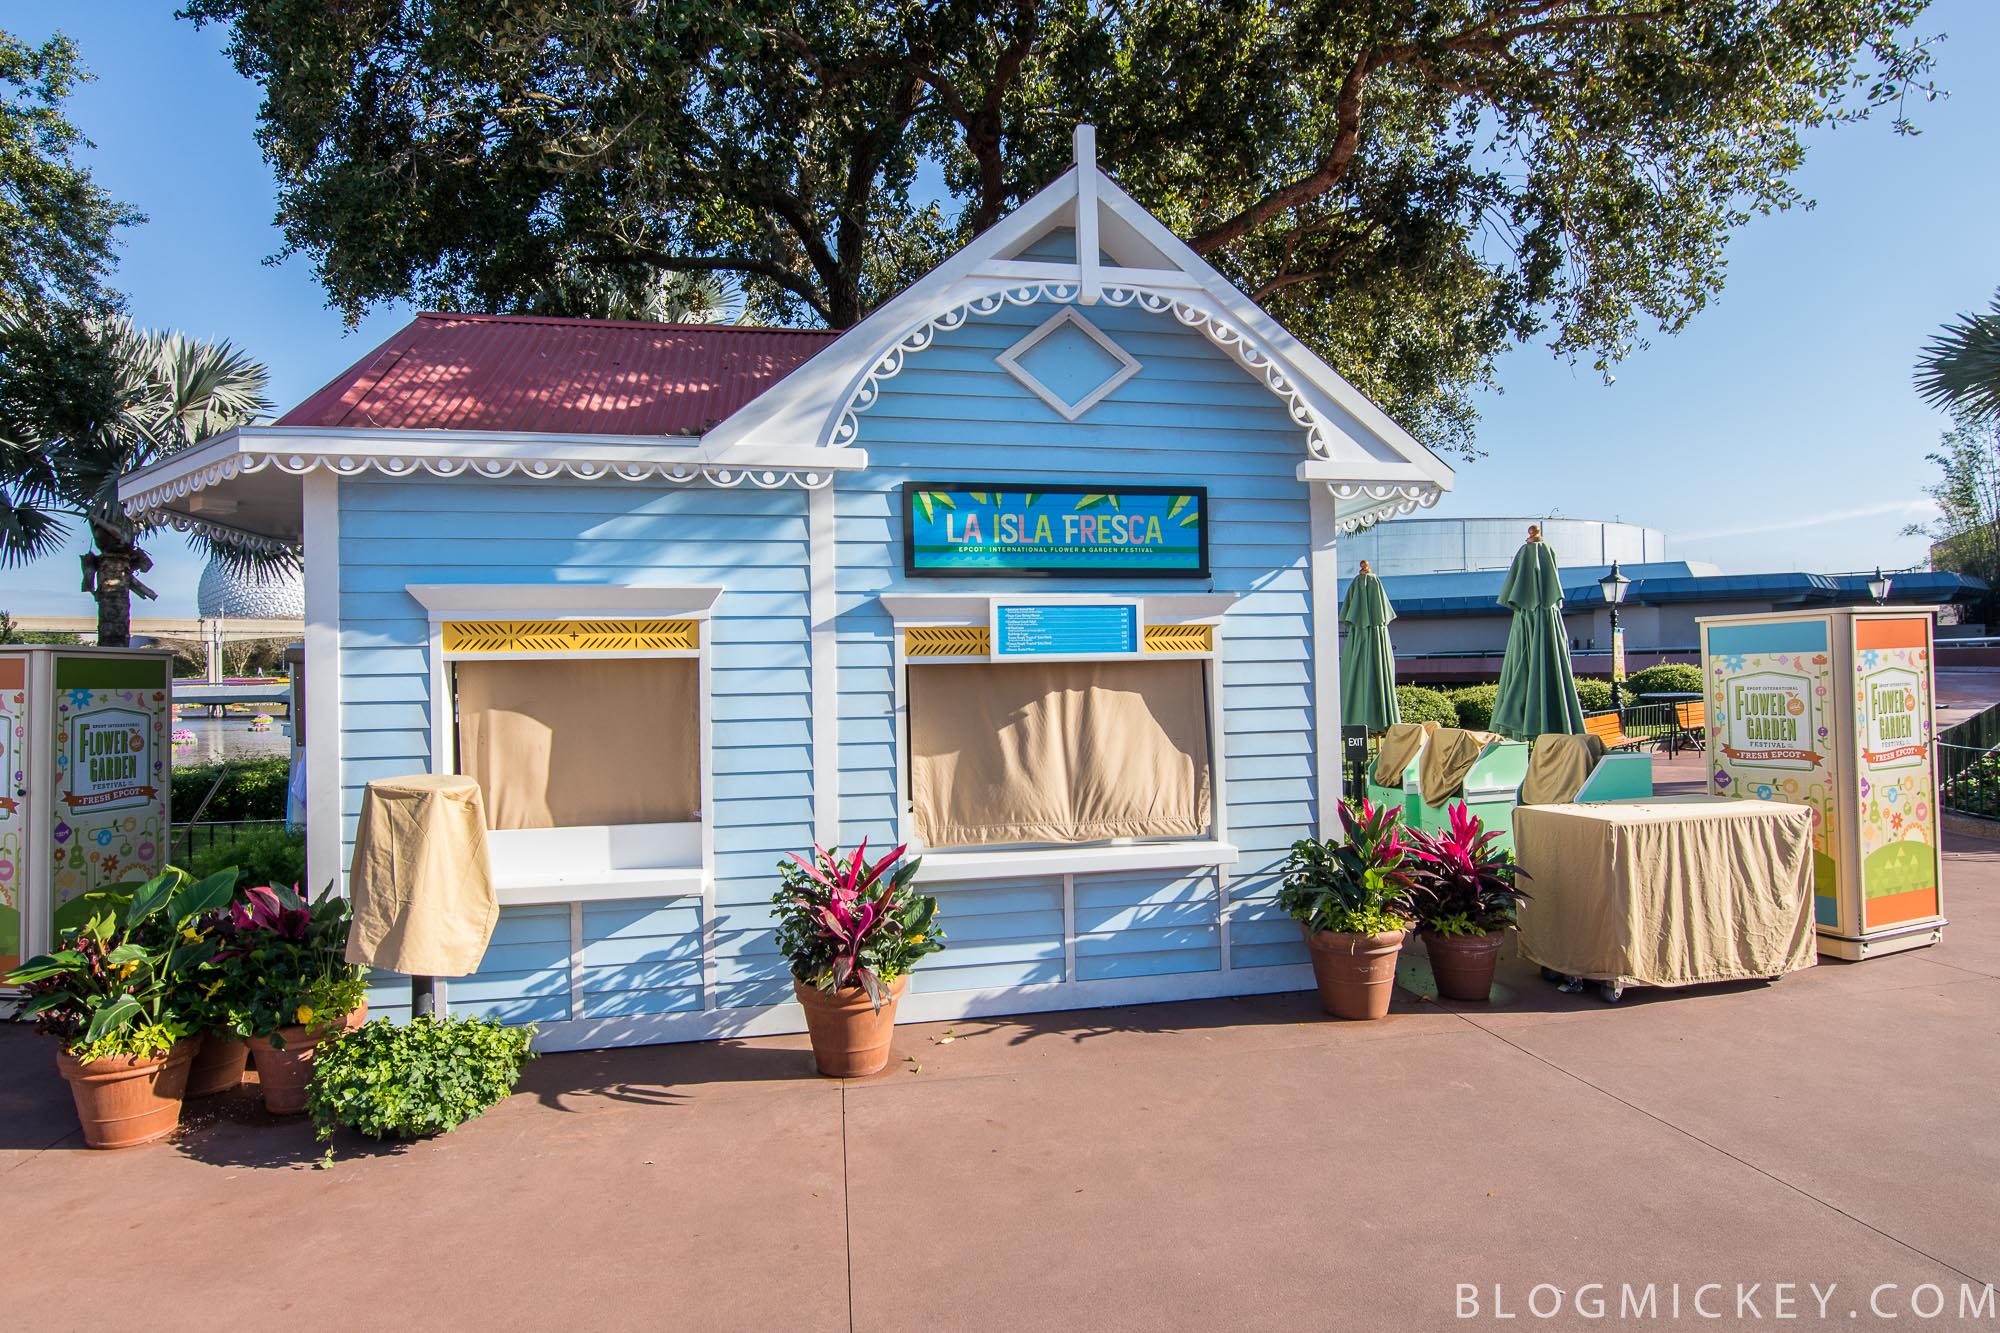 2017 epcot flower and garden festival outdoor kitchens, menus, and